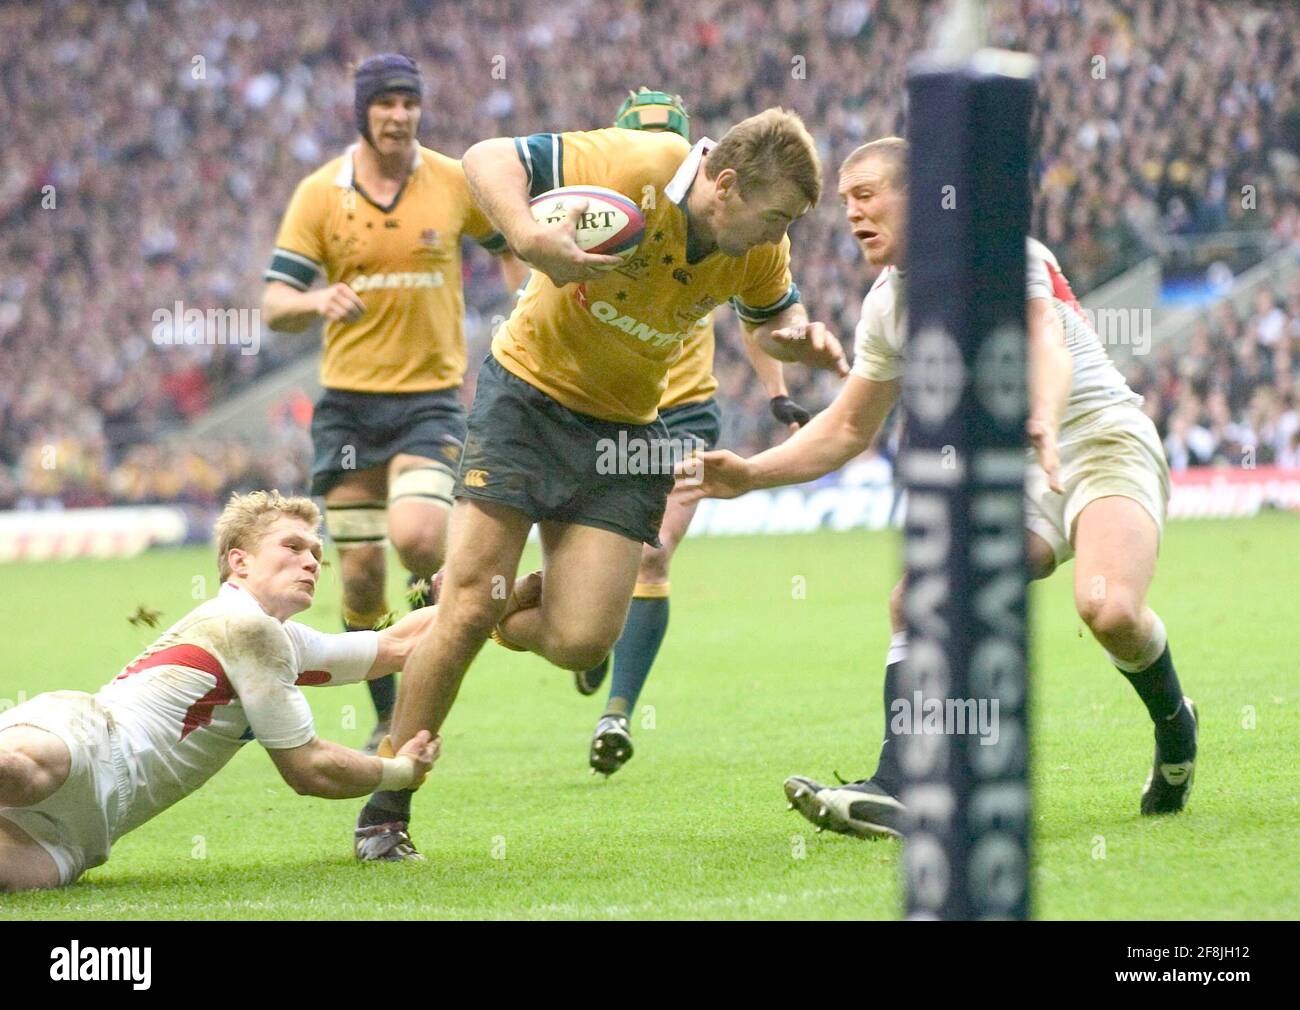 ENGLAND v australia  AT TWICKENHAM CHRIS LATHAM ABOUT TO SCORE HIS TRY 27/11/2004  PICTURE DAVID ASHDOWNRUGBY ENGLAND Stock Photo